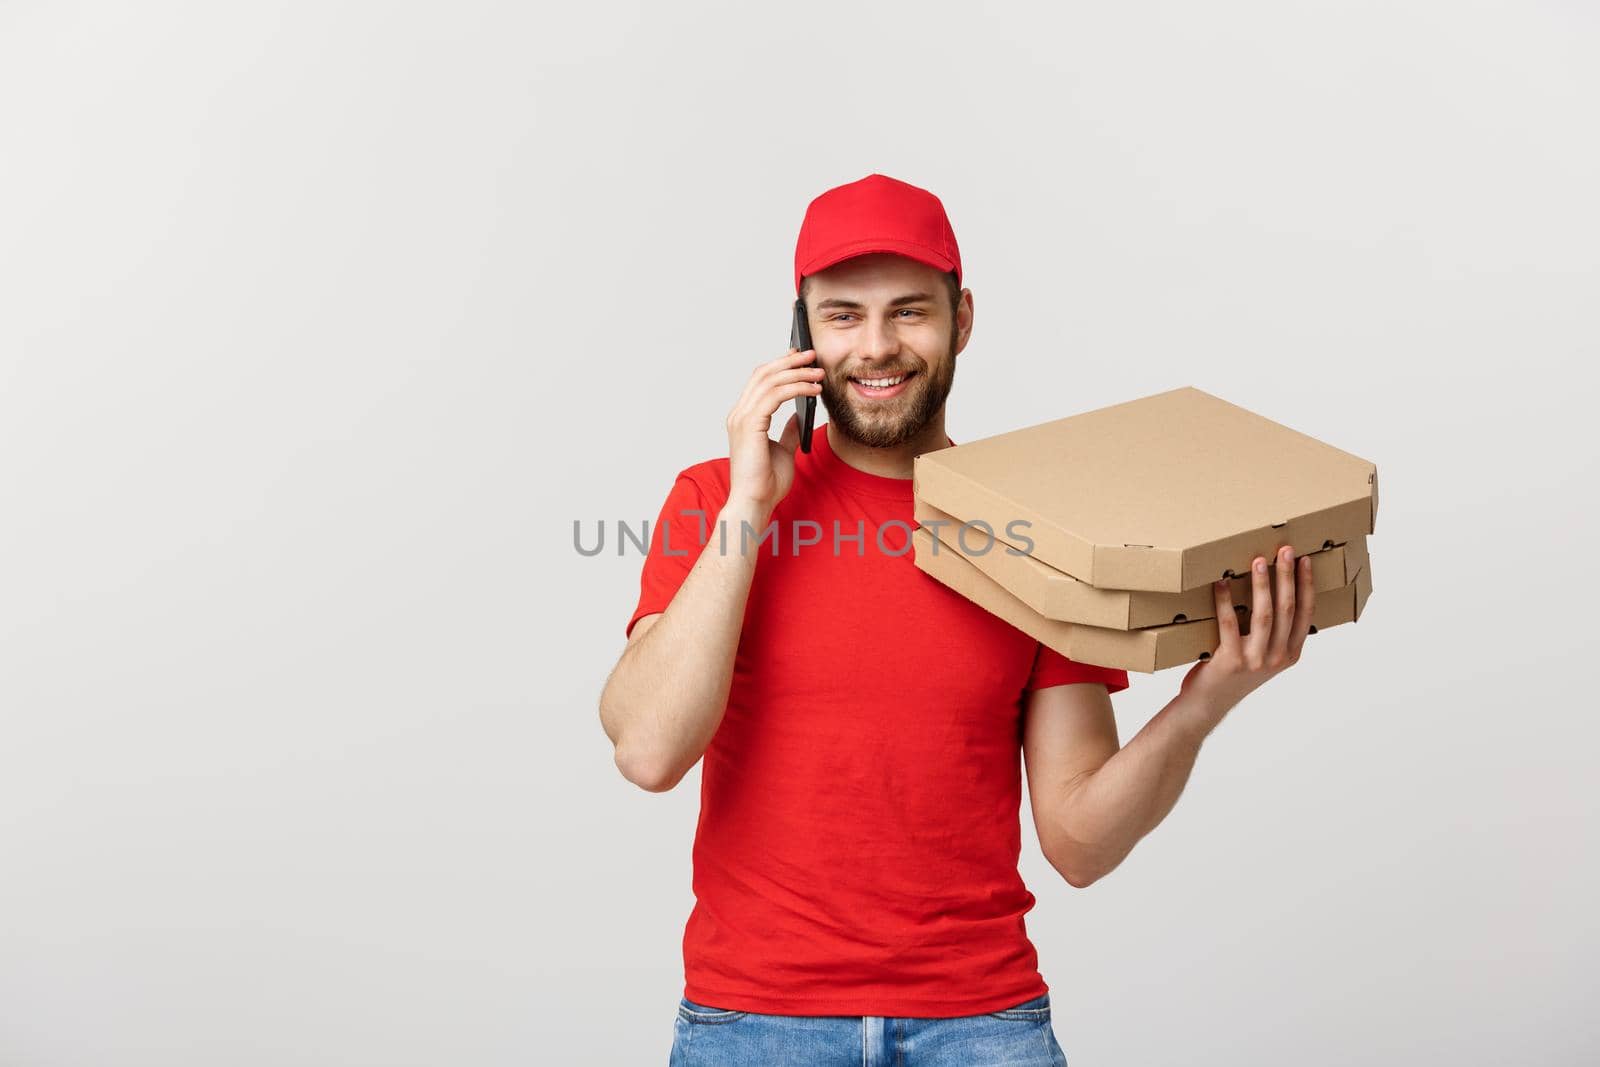 Portrait of a smiling delivery man in red cap talking on mobile phone while holding pizza boxes isolated on the white background.